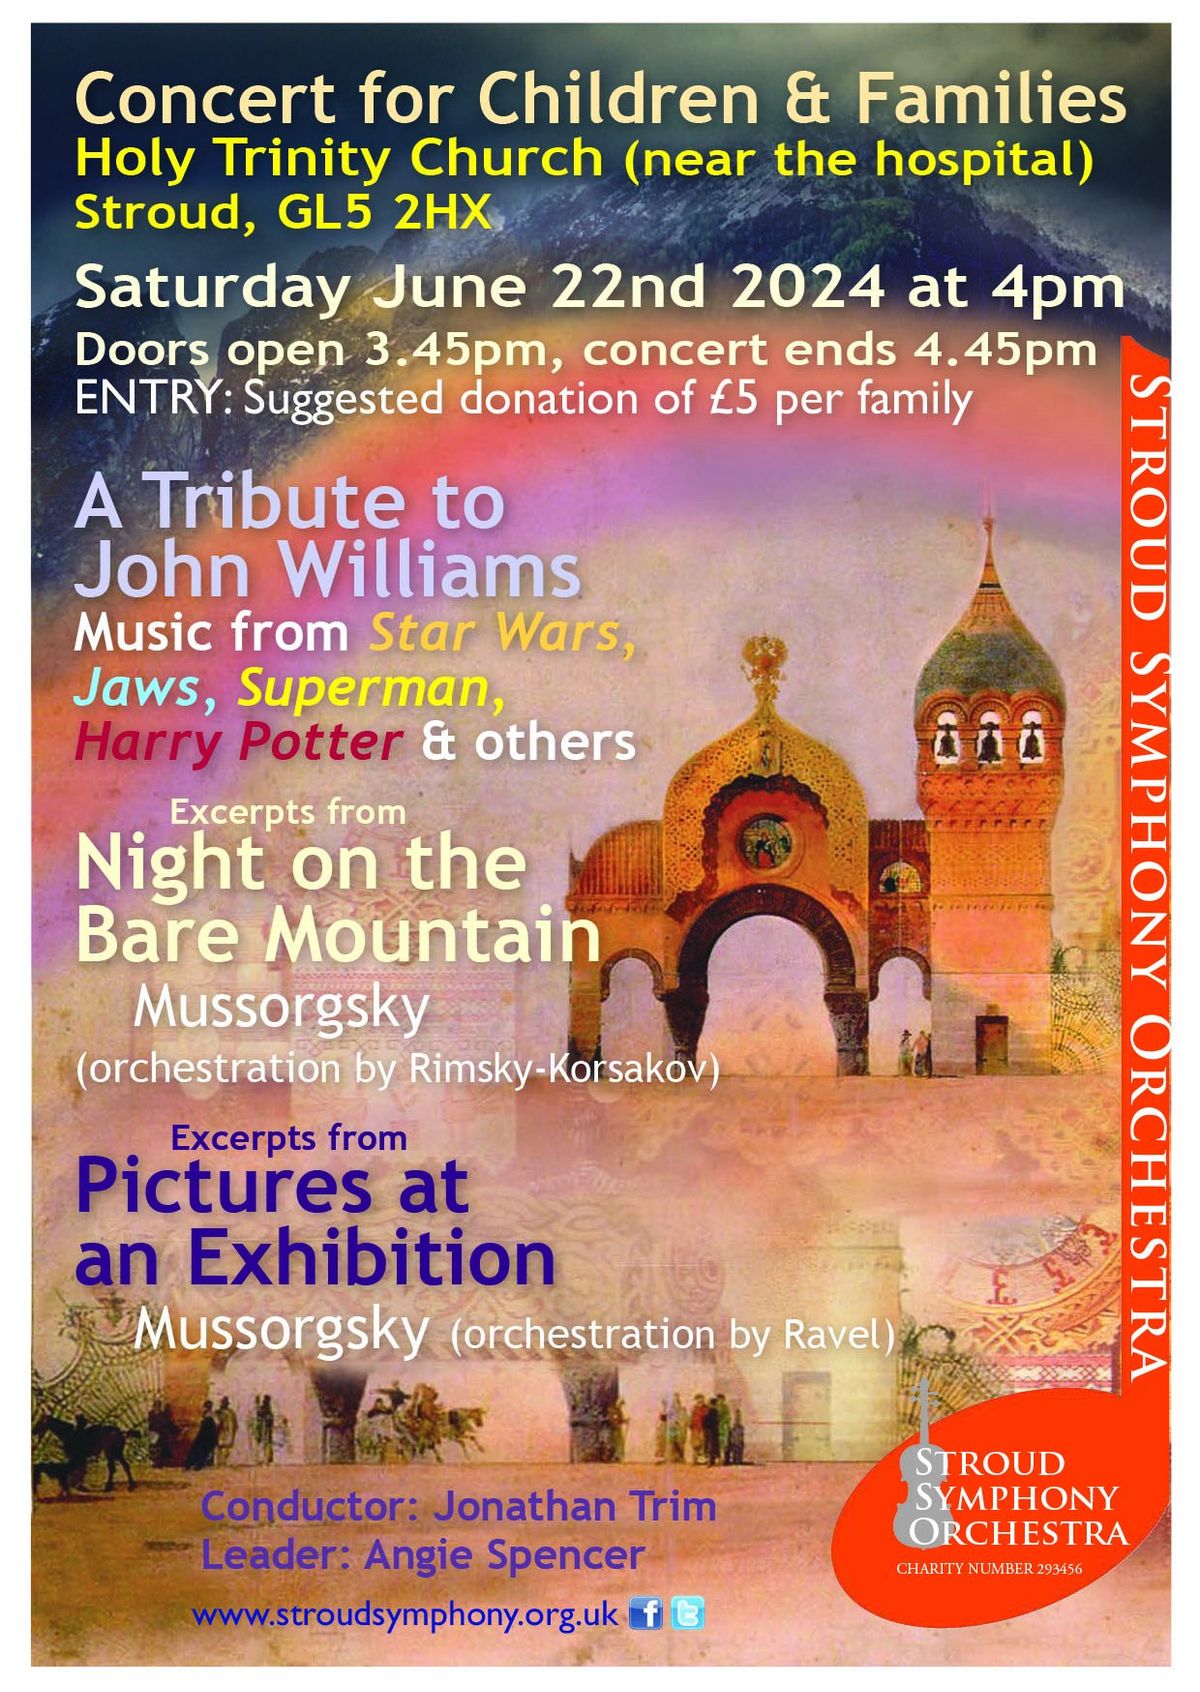 Stroud Symphony Orchestra Concert for Children and Families